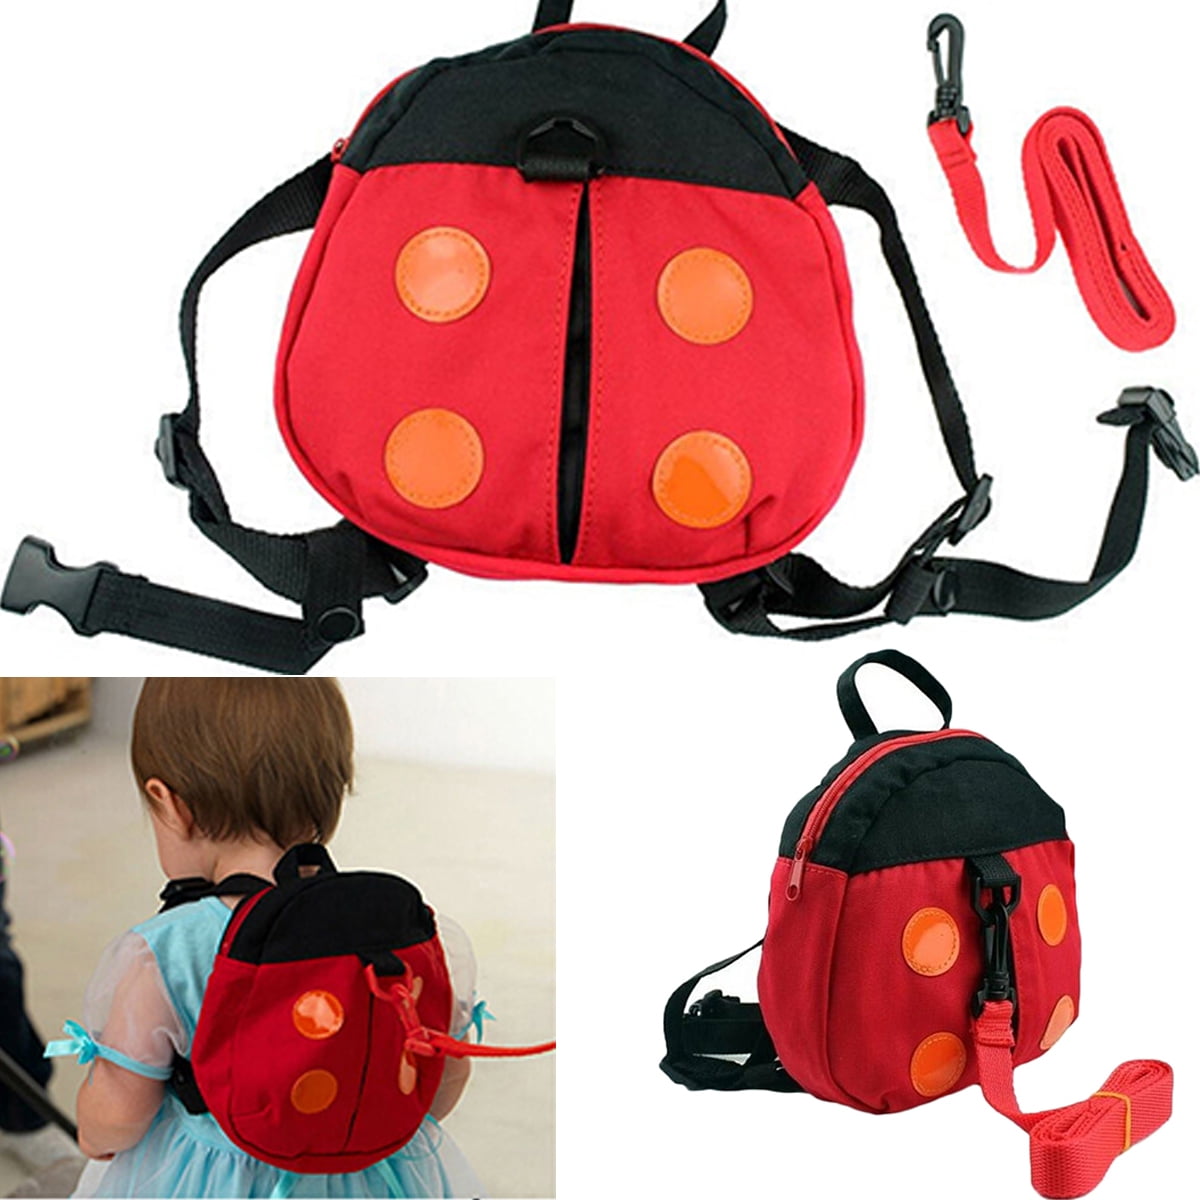 Ladybug Toddler Safety Harness Leash For Kids with Small Backpack 